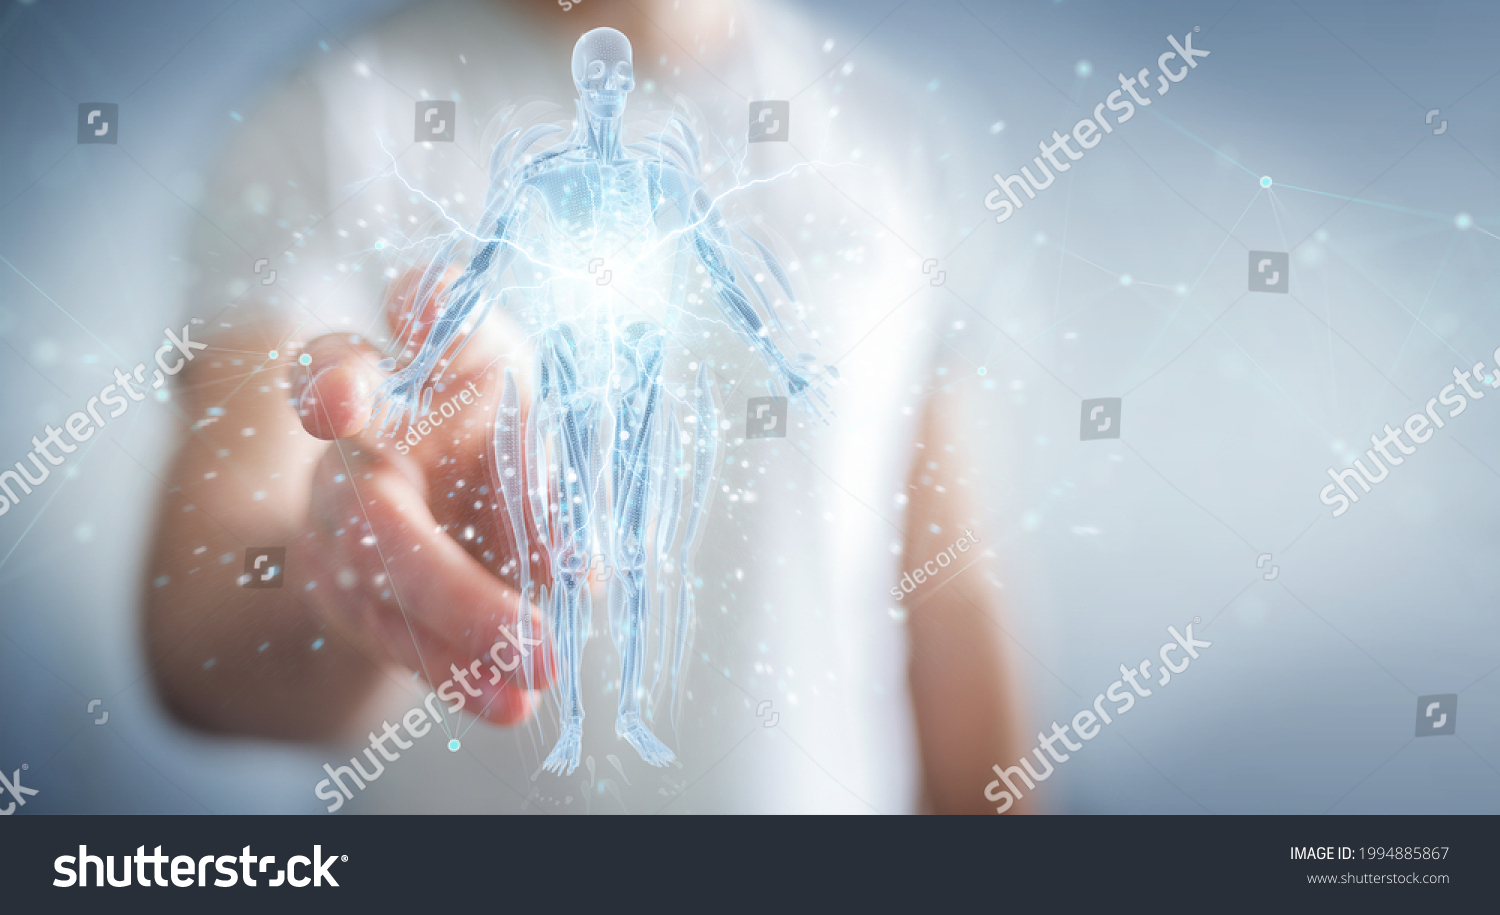 Man on blurred background using digital x-ray human body holographic scan projection 3D rendering #1994885867